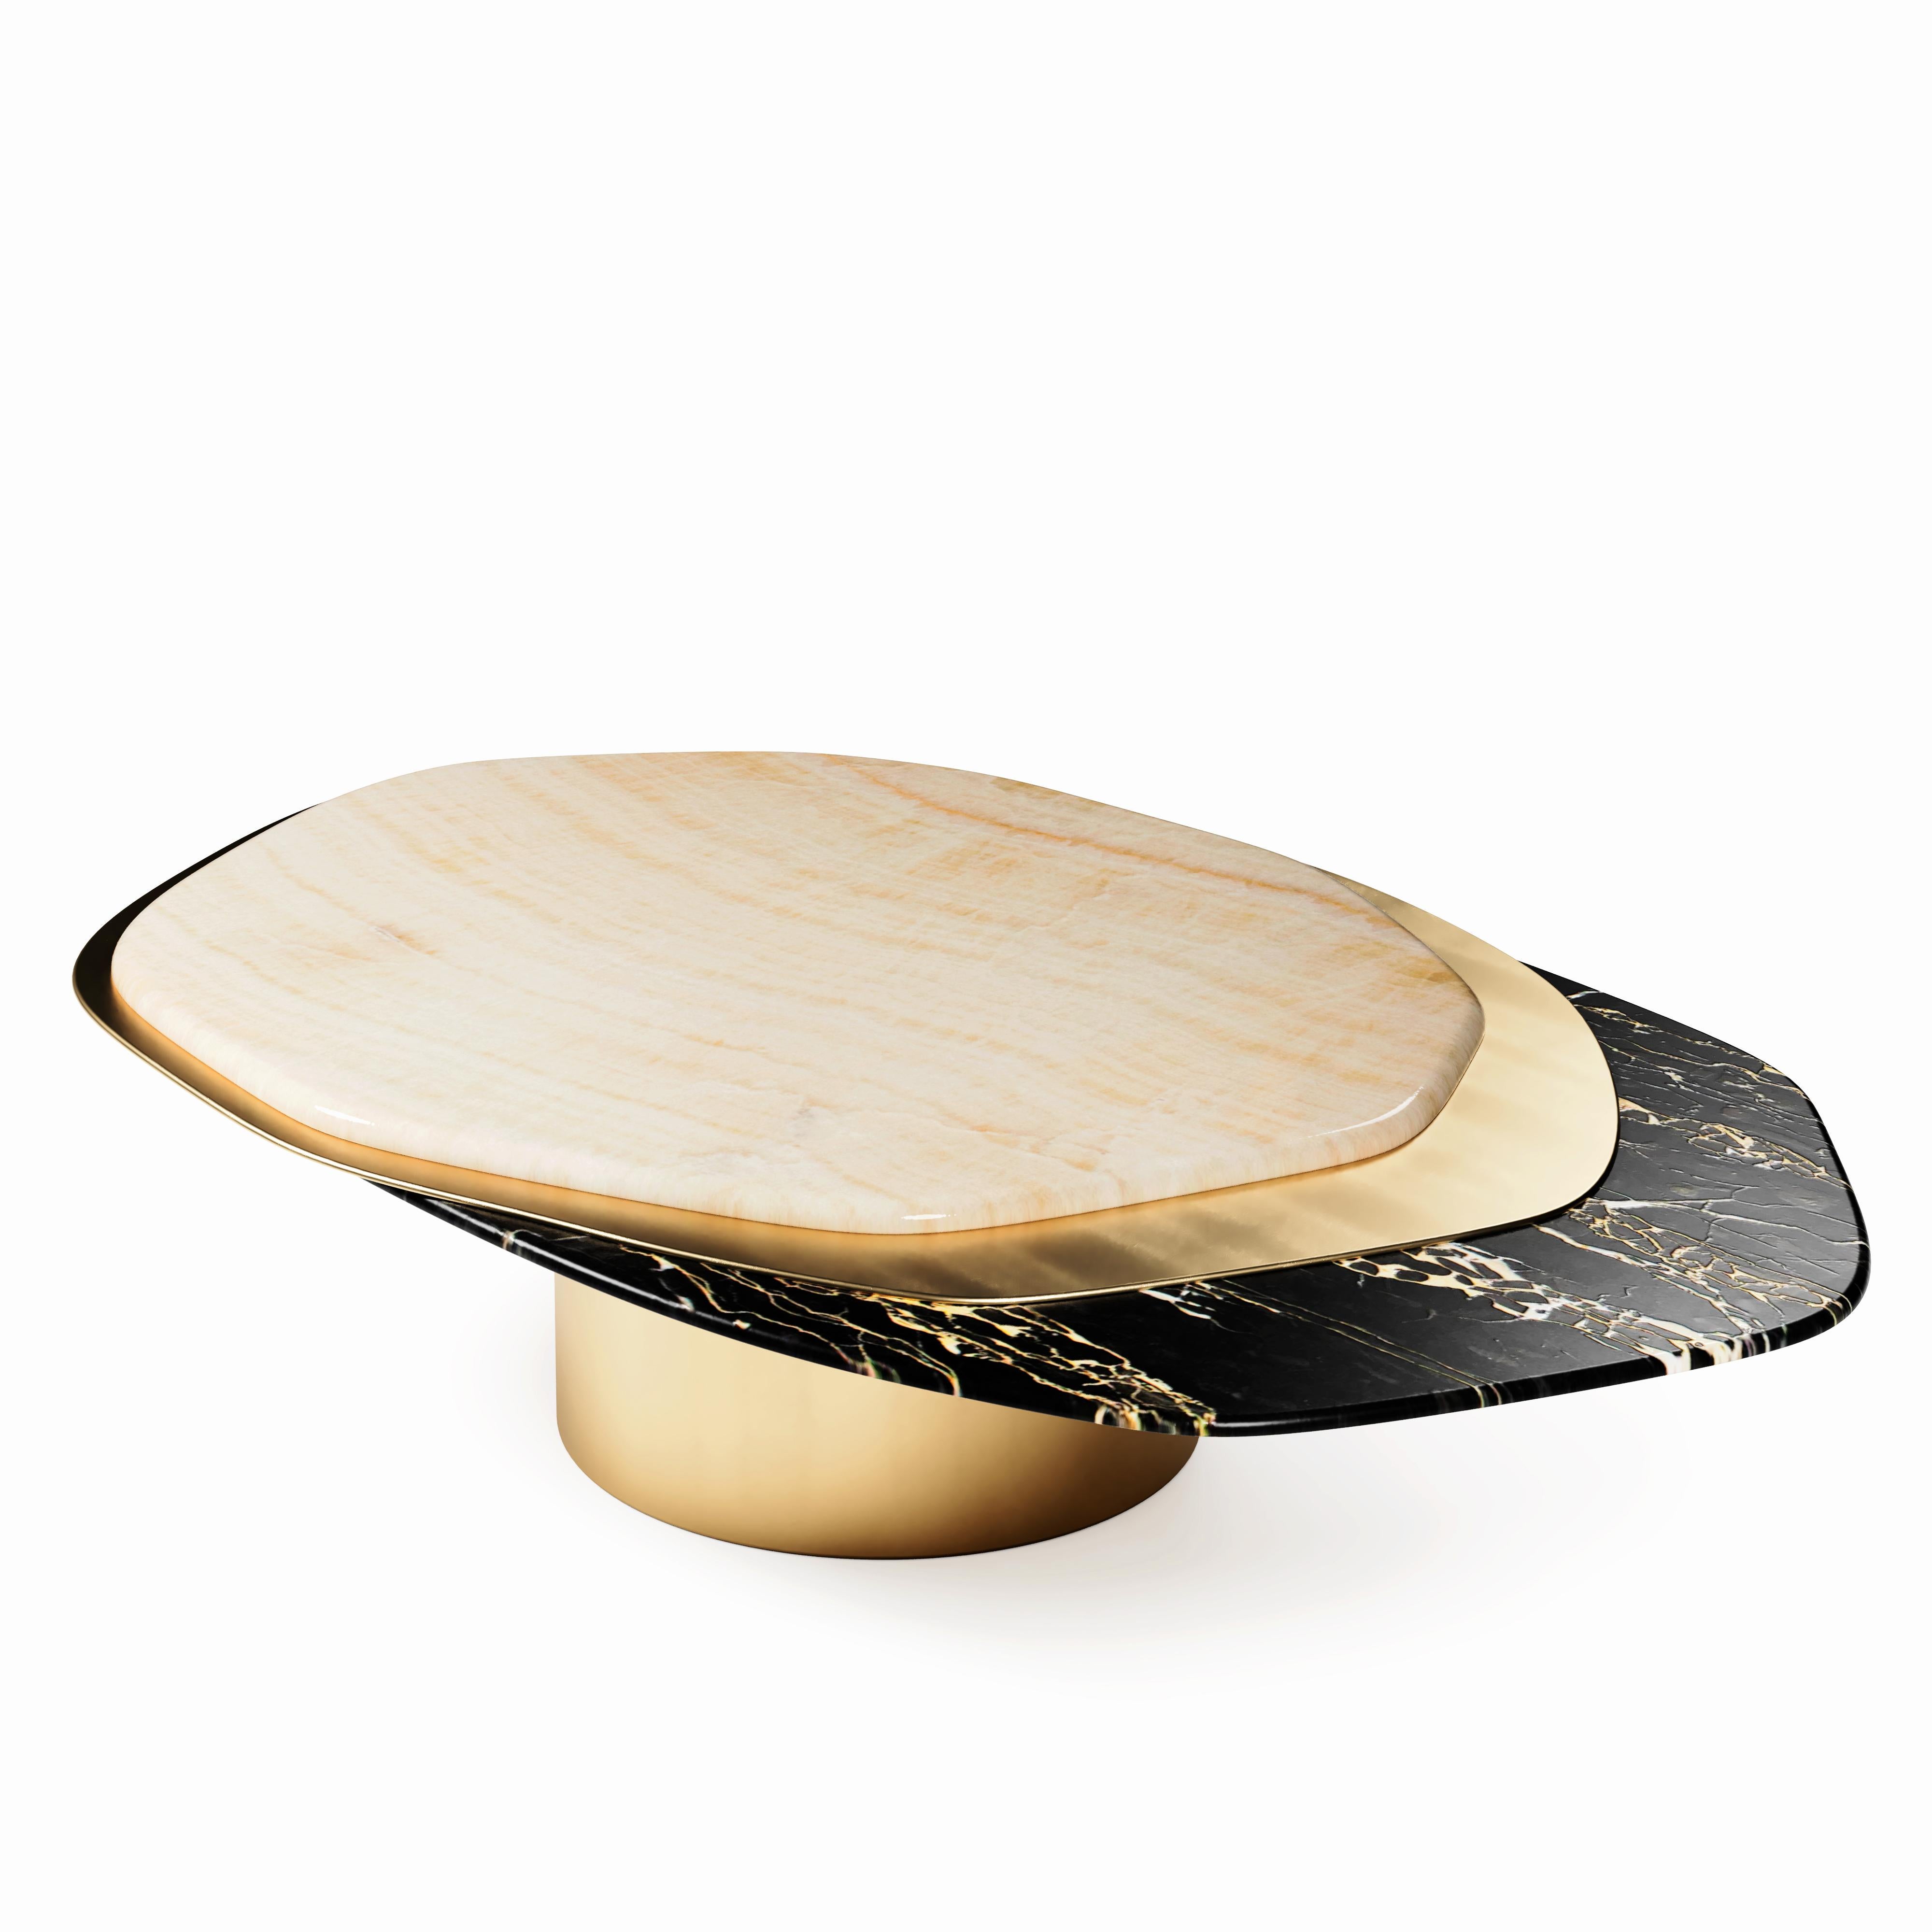 The Epicure VI coffee table, 1 of 1 by Grzegorz Majka
Edition 1 of 1
Dimensions: 58 x 40 x 13 in
Materials: Solid Brass. Nero Portoro Marble and Ivory Onyx. 


Luxury doesn’t always follow common patterns. Luxury goes beyond and almost like